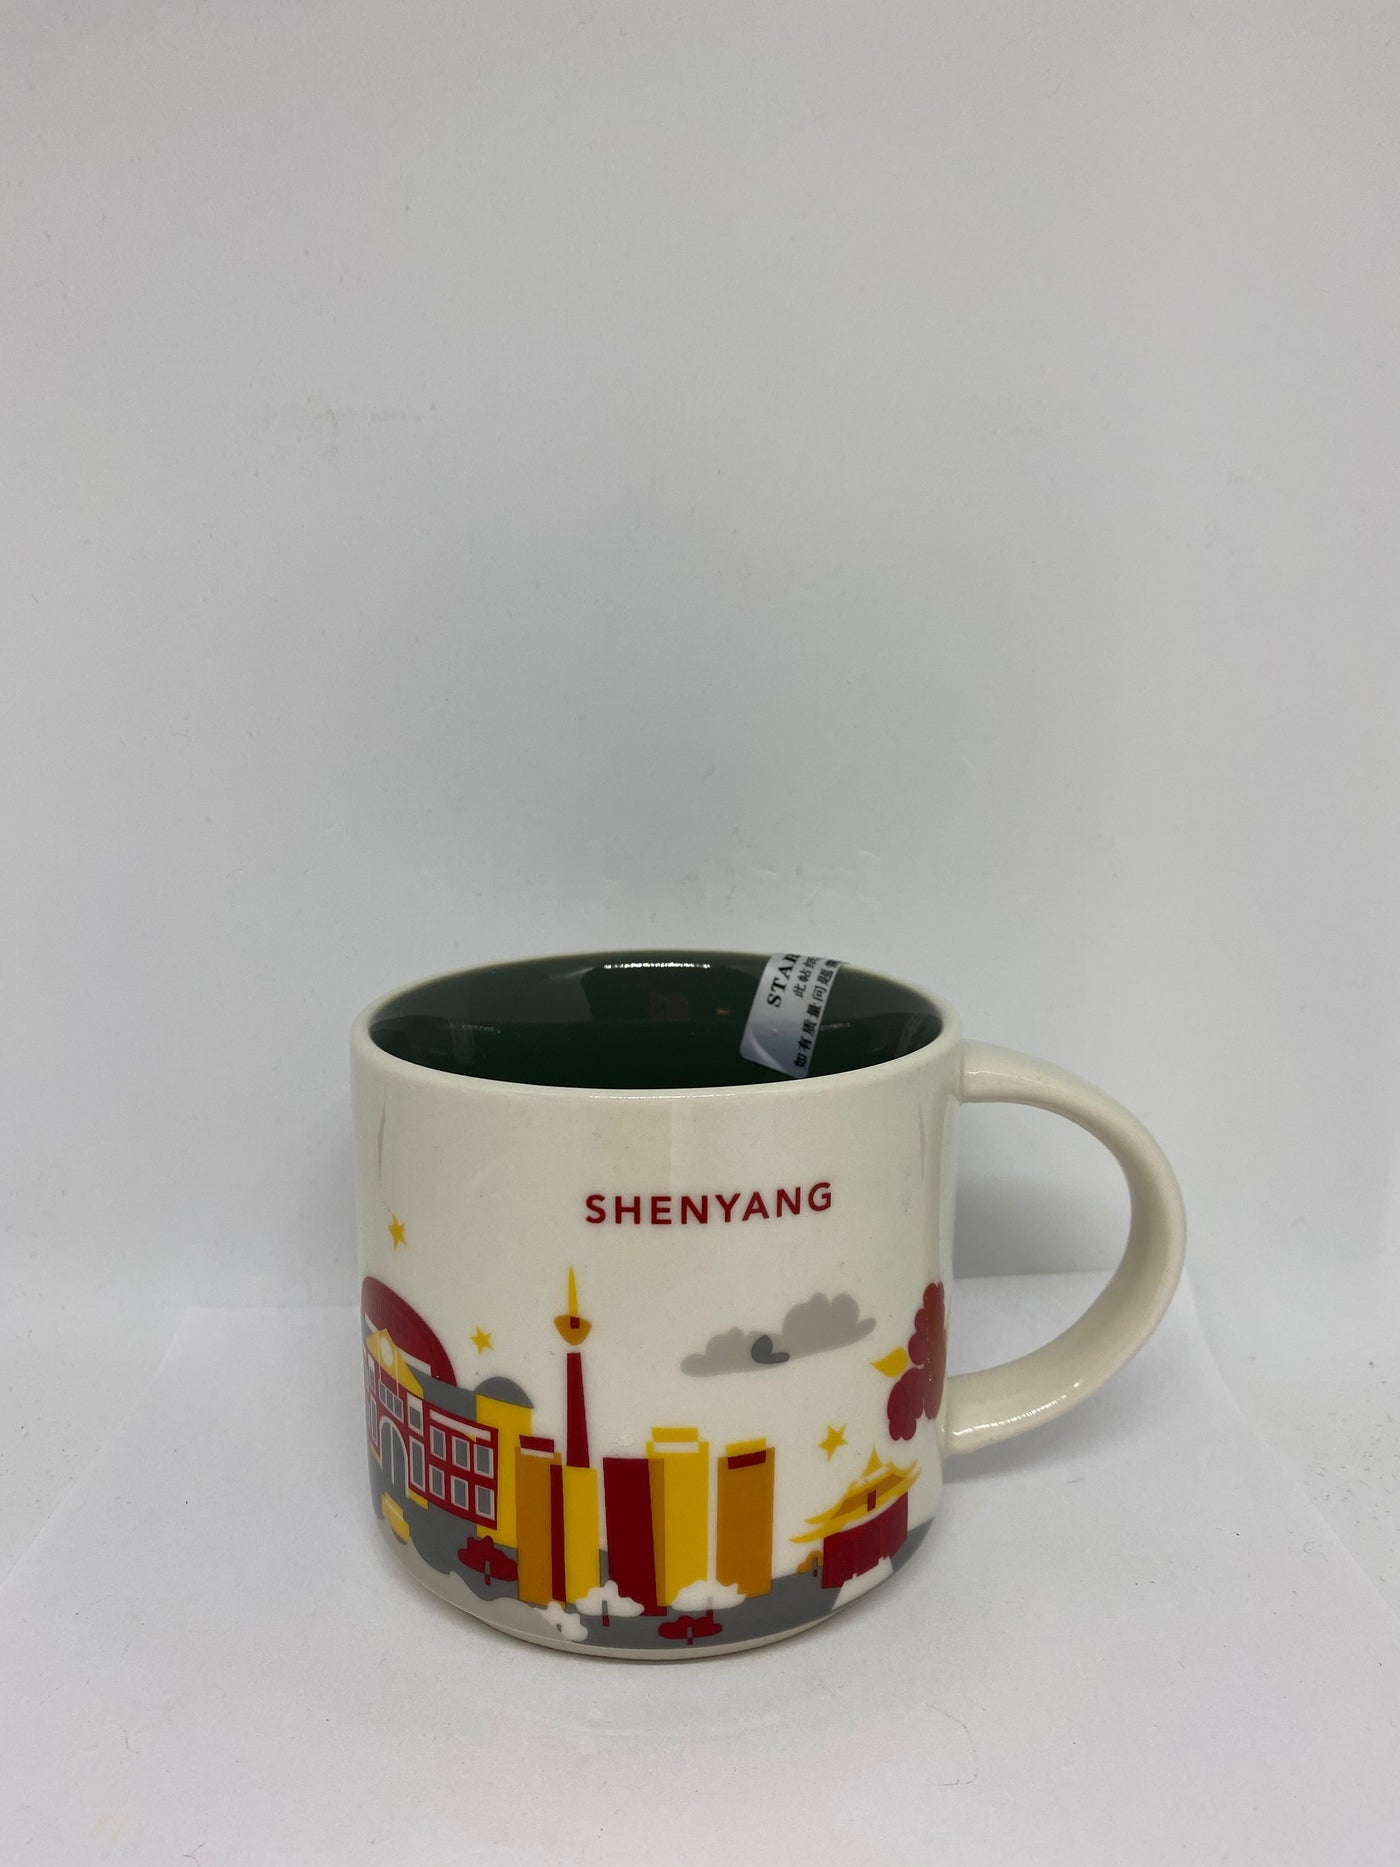 Starbucks You Are Here Collection Shenyang China Ceramic Coffee Mug New With Box